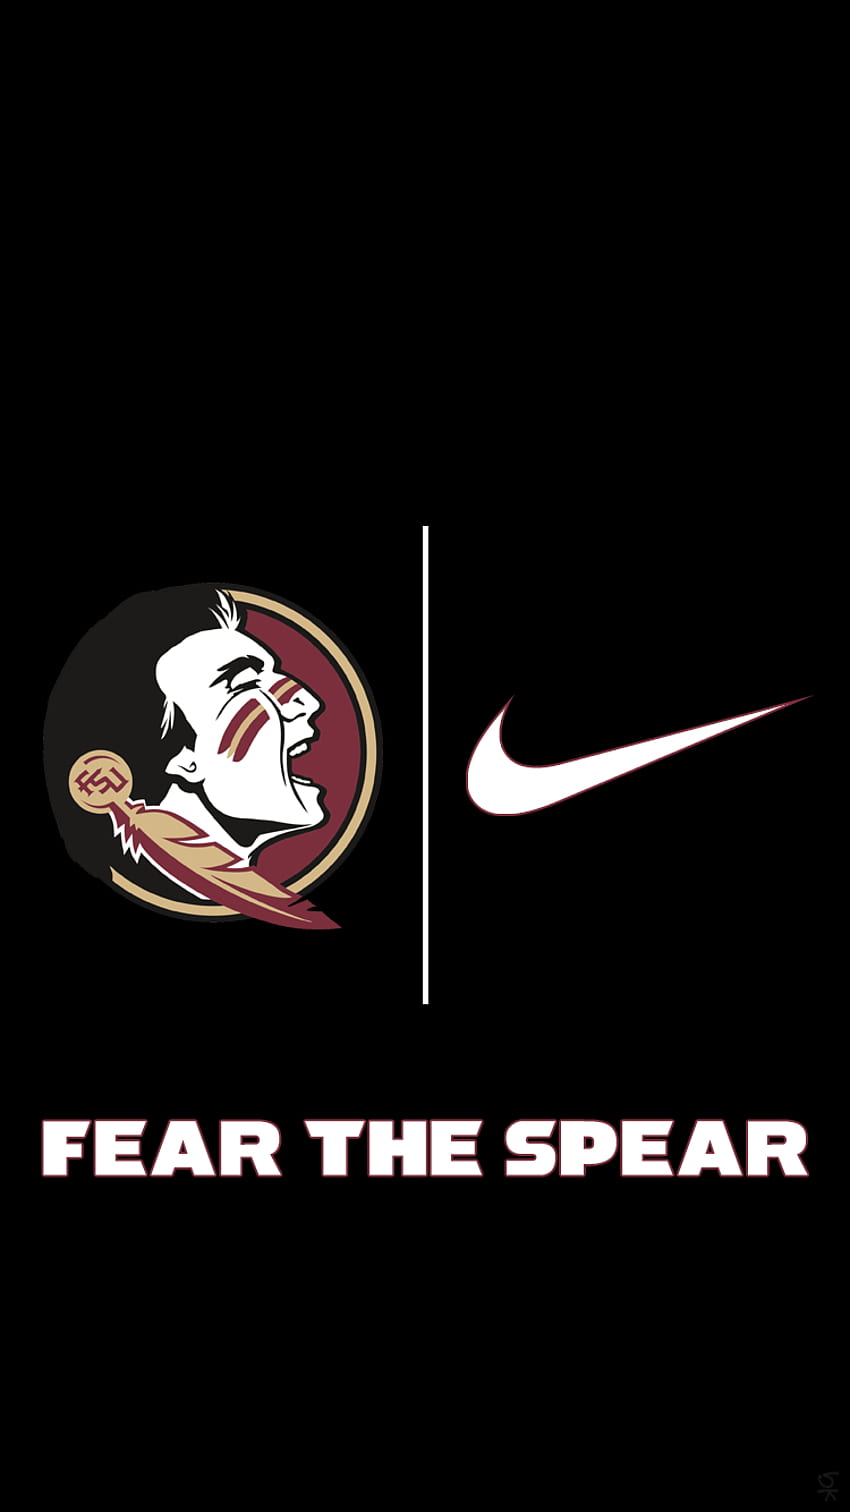 Florida State Seminoles on 247Sports  Its Wallpaper Wednesday  Save  this to your phone and rep Florida State Seminoles Football all the time   Facebook